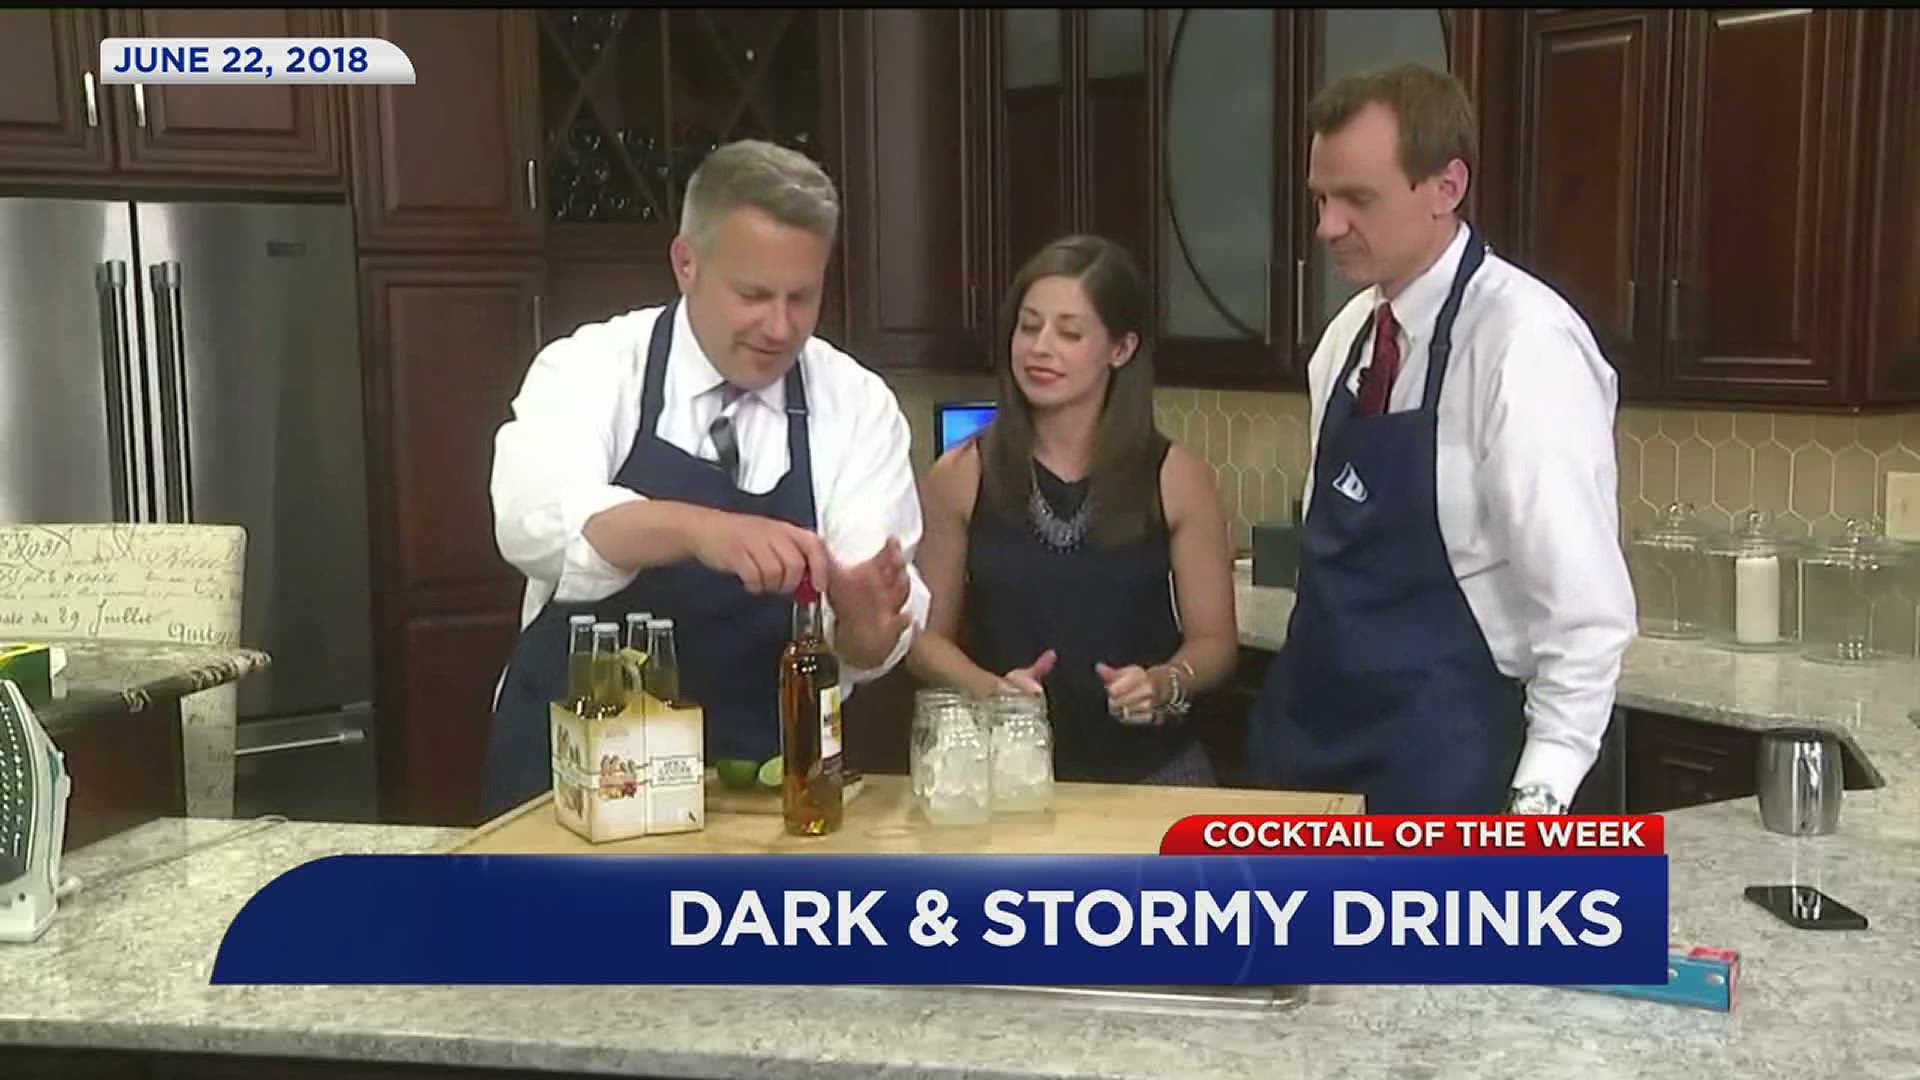 We tried to forecast the weather with Cocktail of the Week on June 22, 2018.